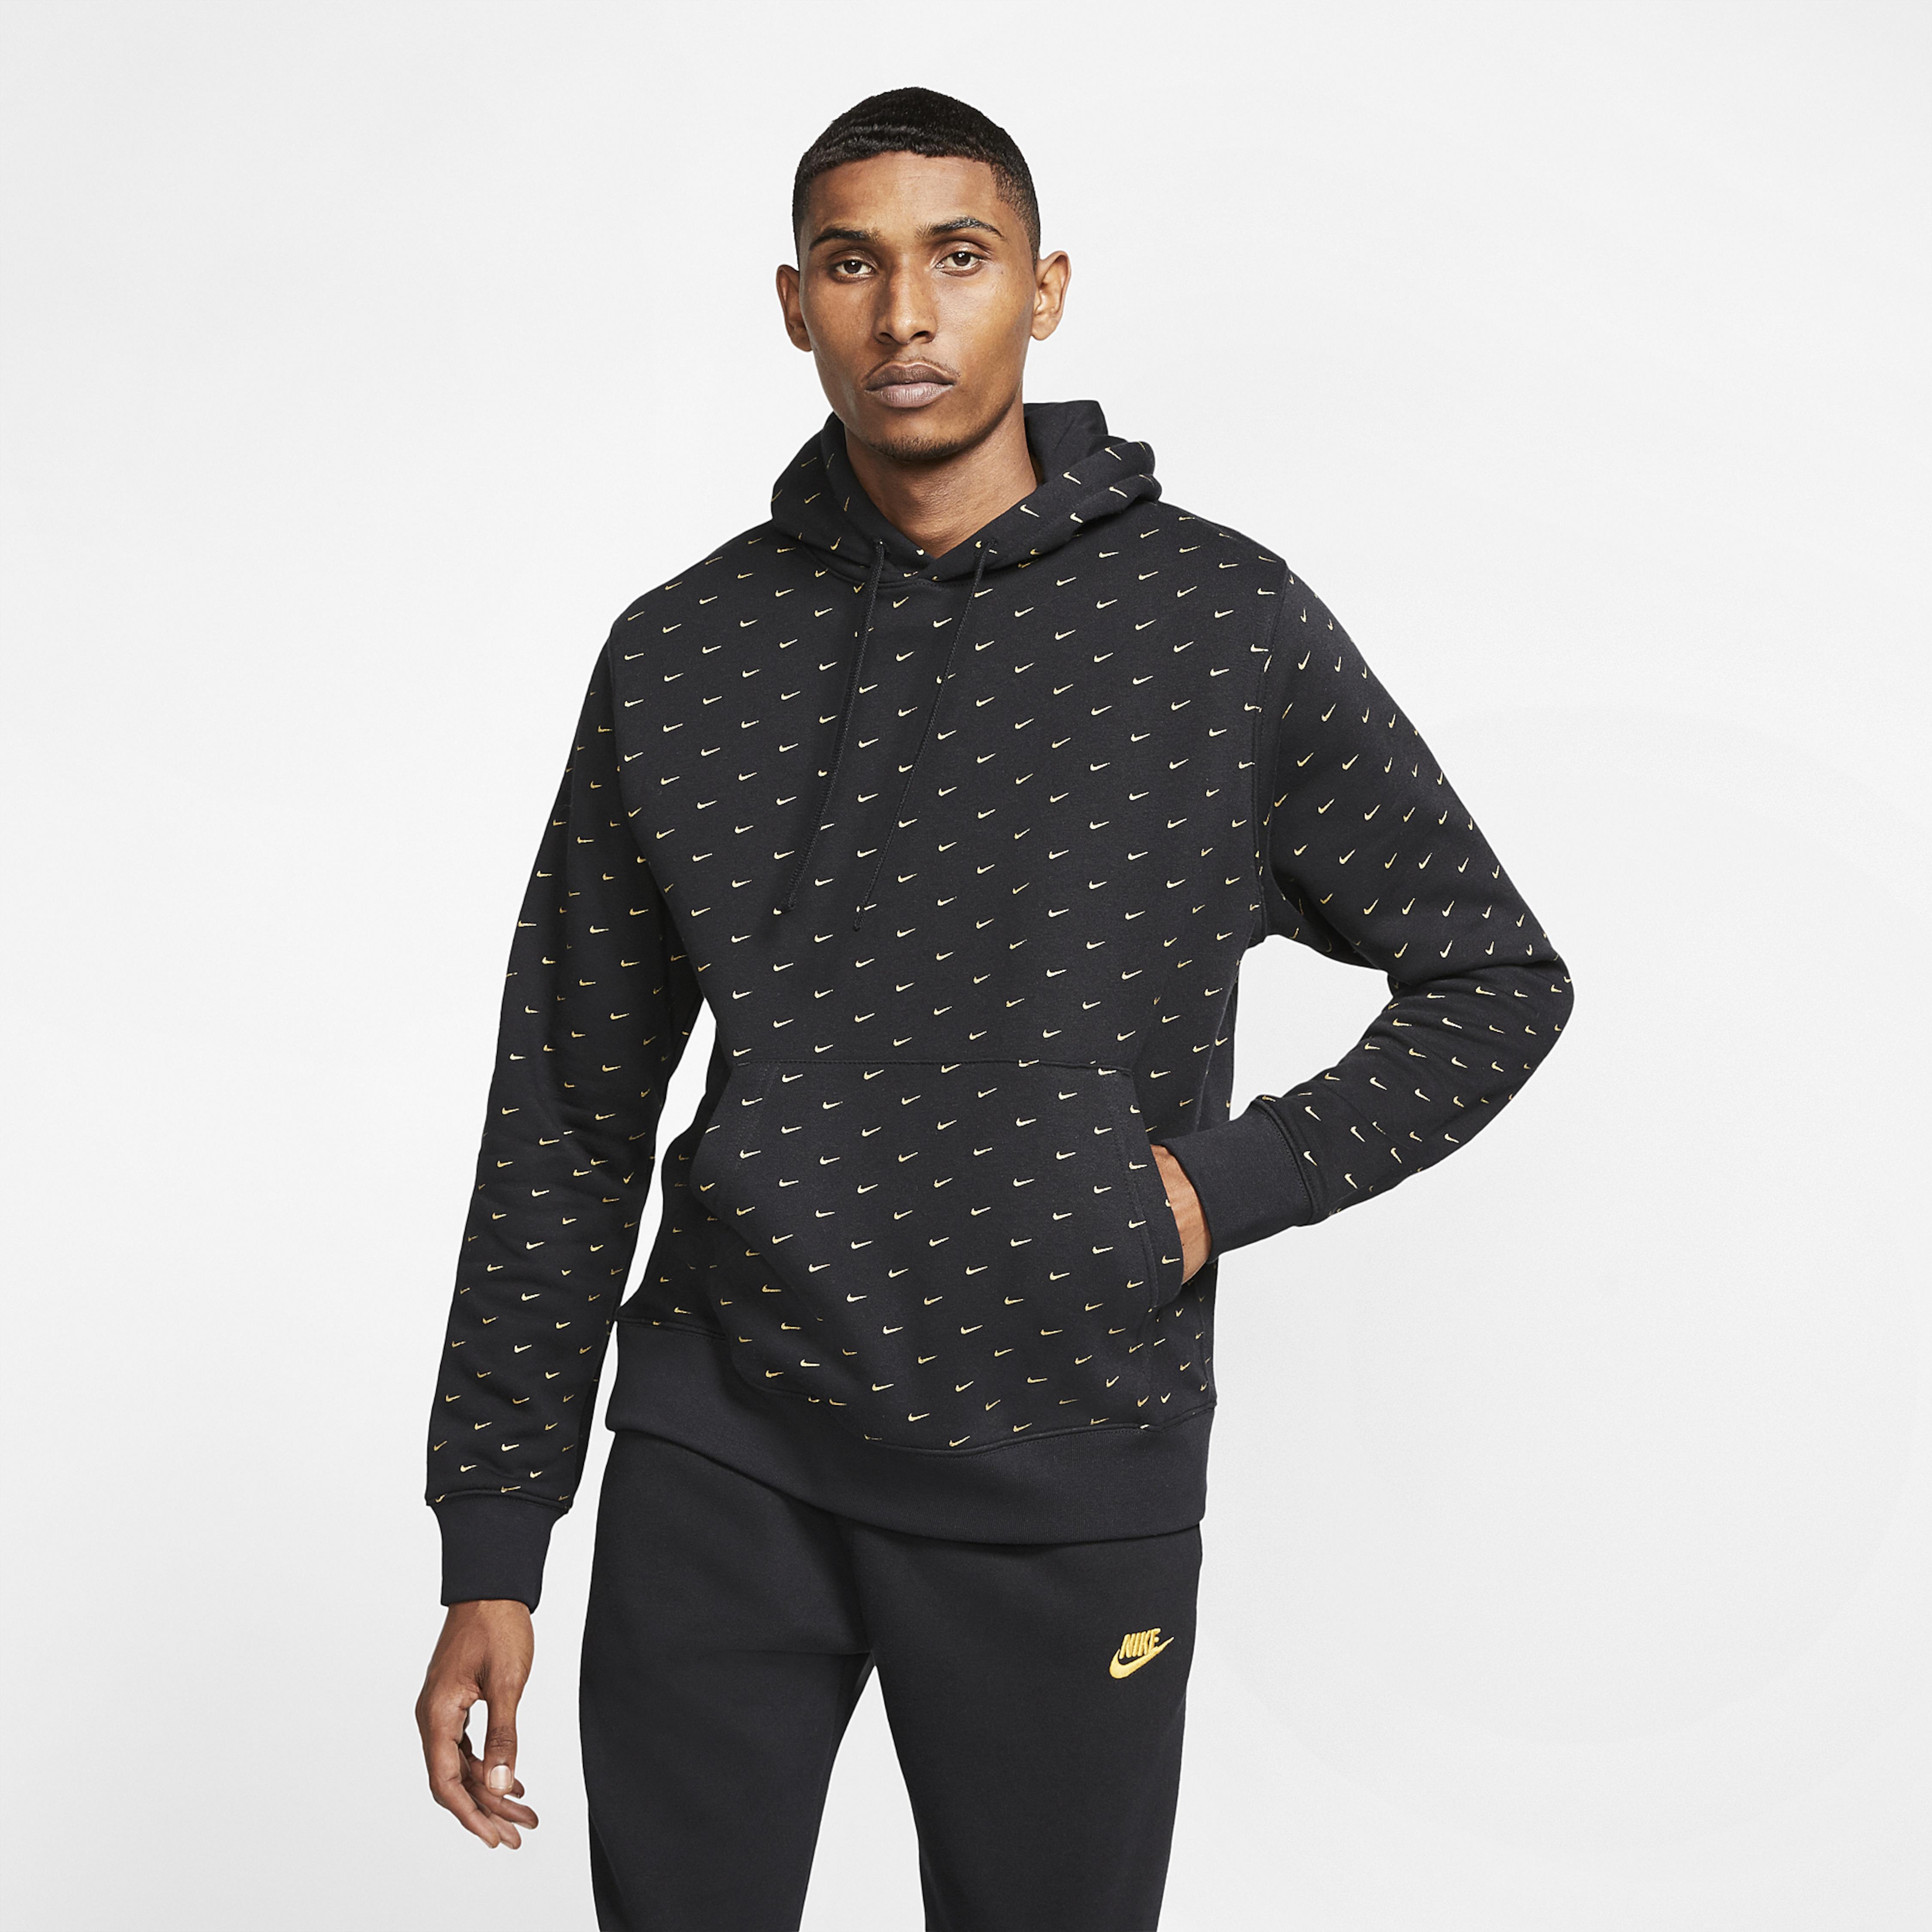 Black And Gold Hoodie Nike : Retro Gold Vintage Nike Cropped Fleece ...